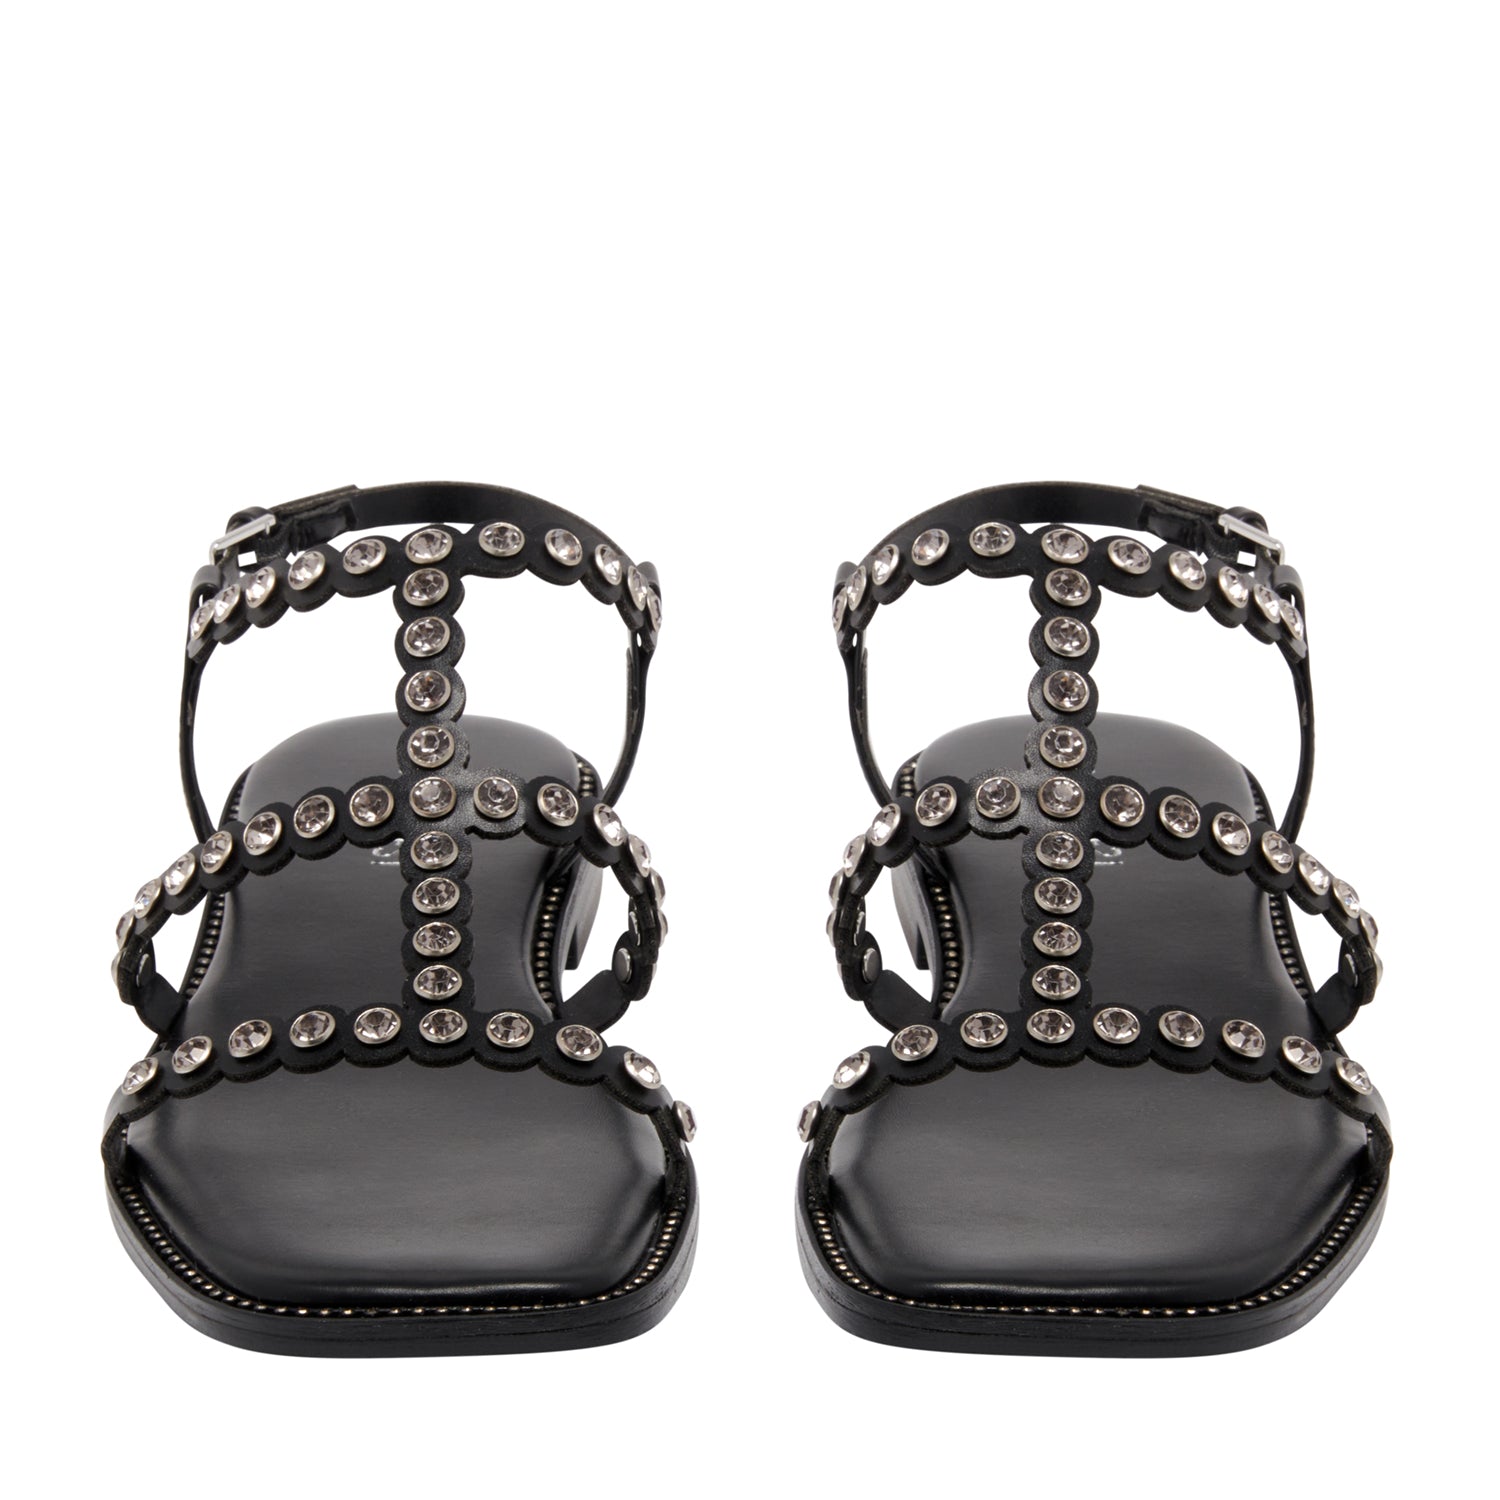 EMELY SANDALS